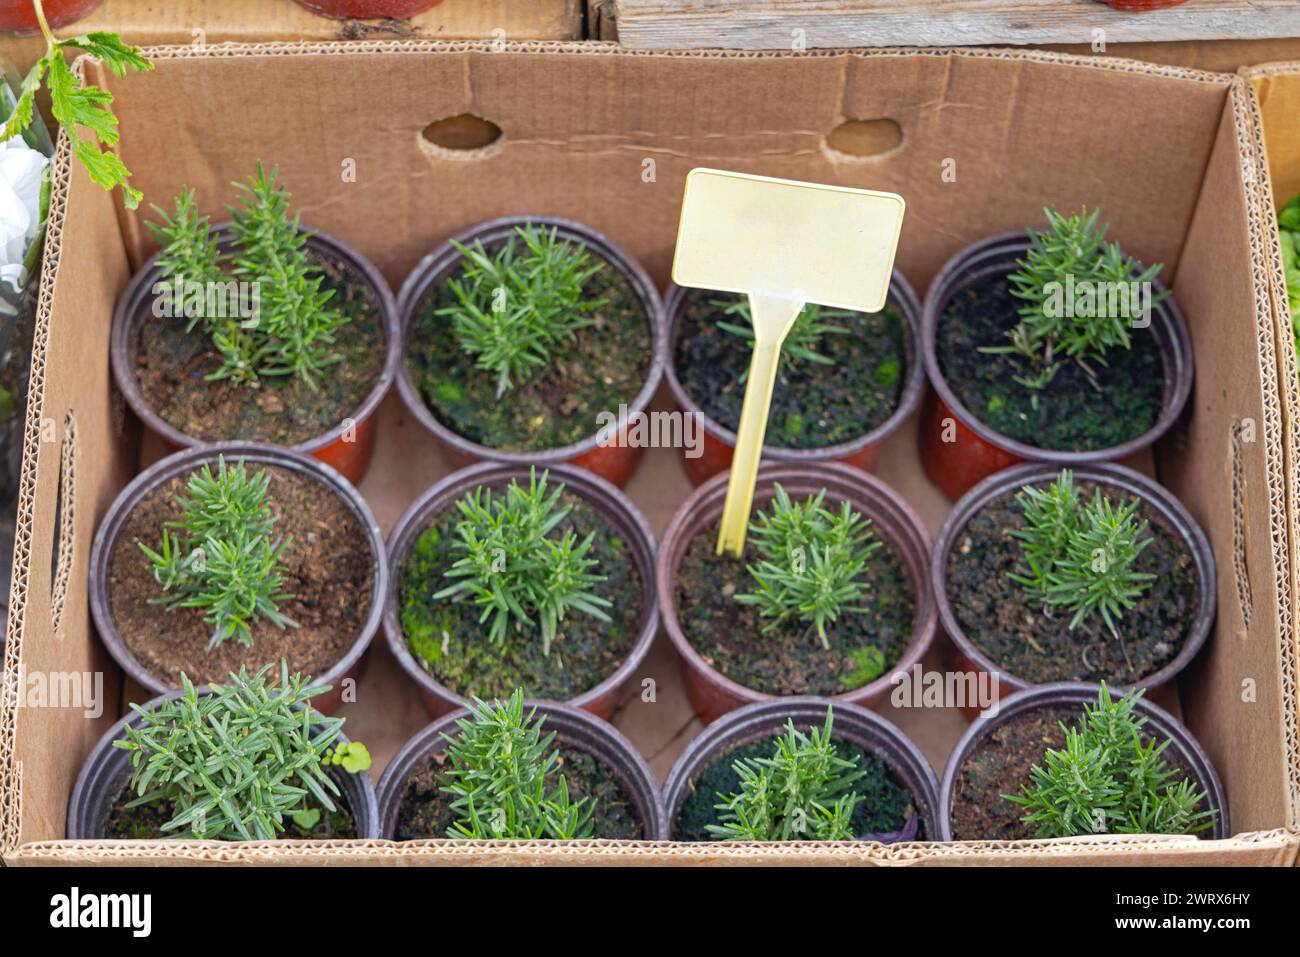 Many Potted Rosemary Plants in Crate at Garden Centre Stock Photo